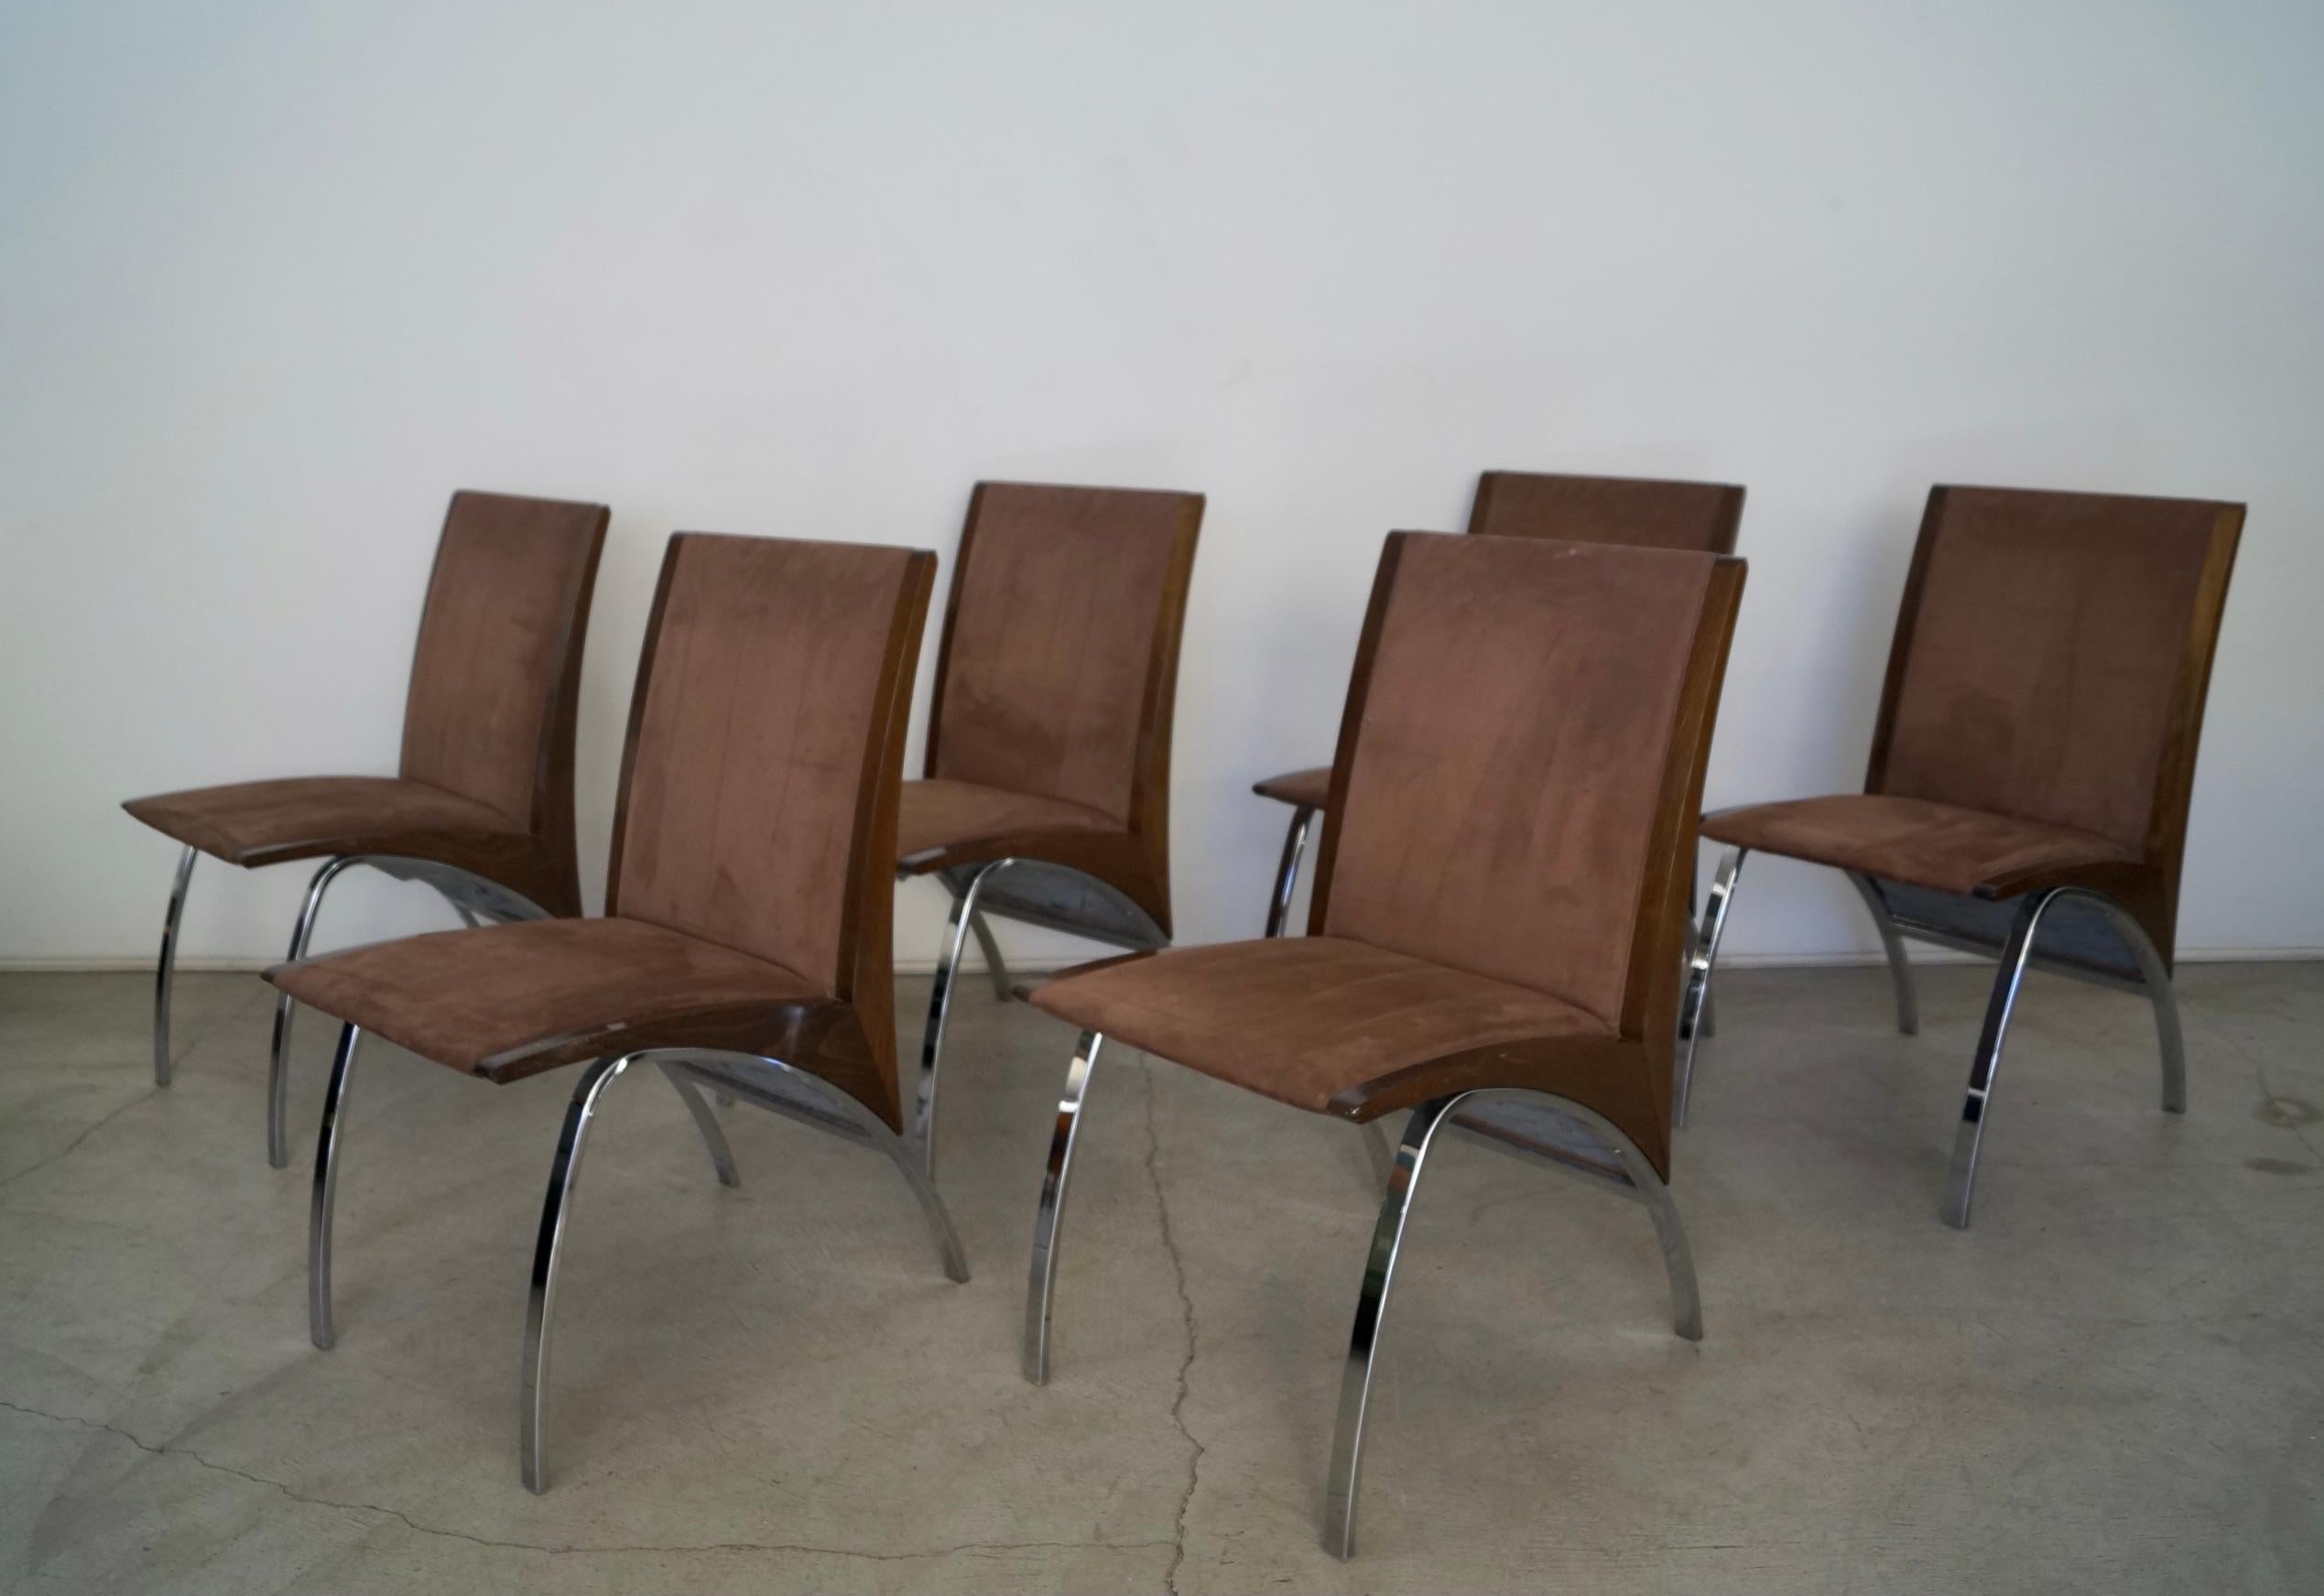 Incredible post-modern dining chairs for sale. From the late 1990's / early 2000's, and truly unique. They were designed by Pietro Costantini, and manufactured by Ello Furniture which is now defunct. They have a an arching chrome base with a